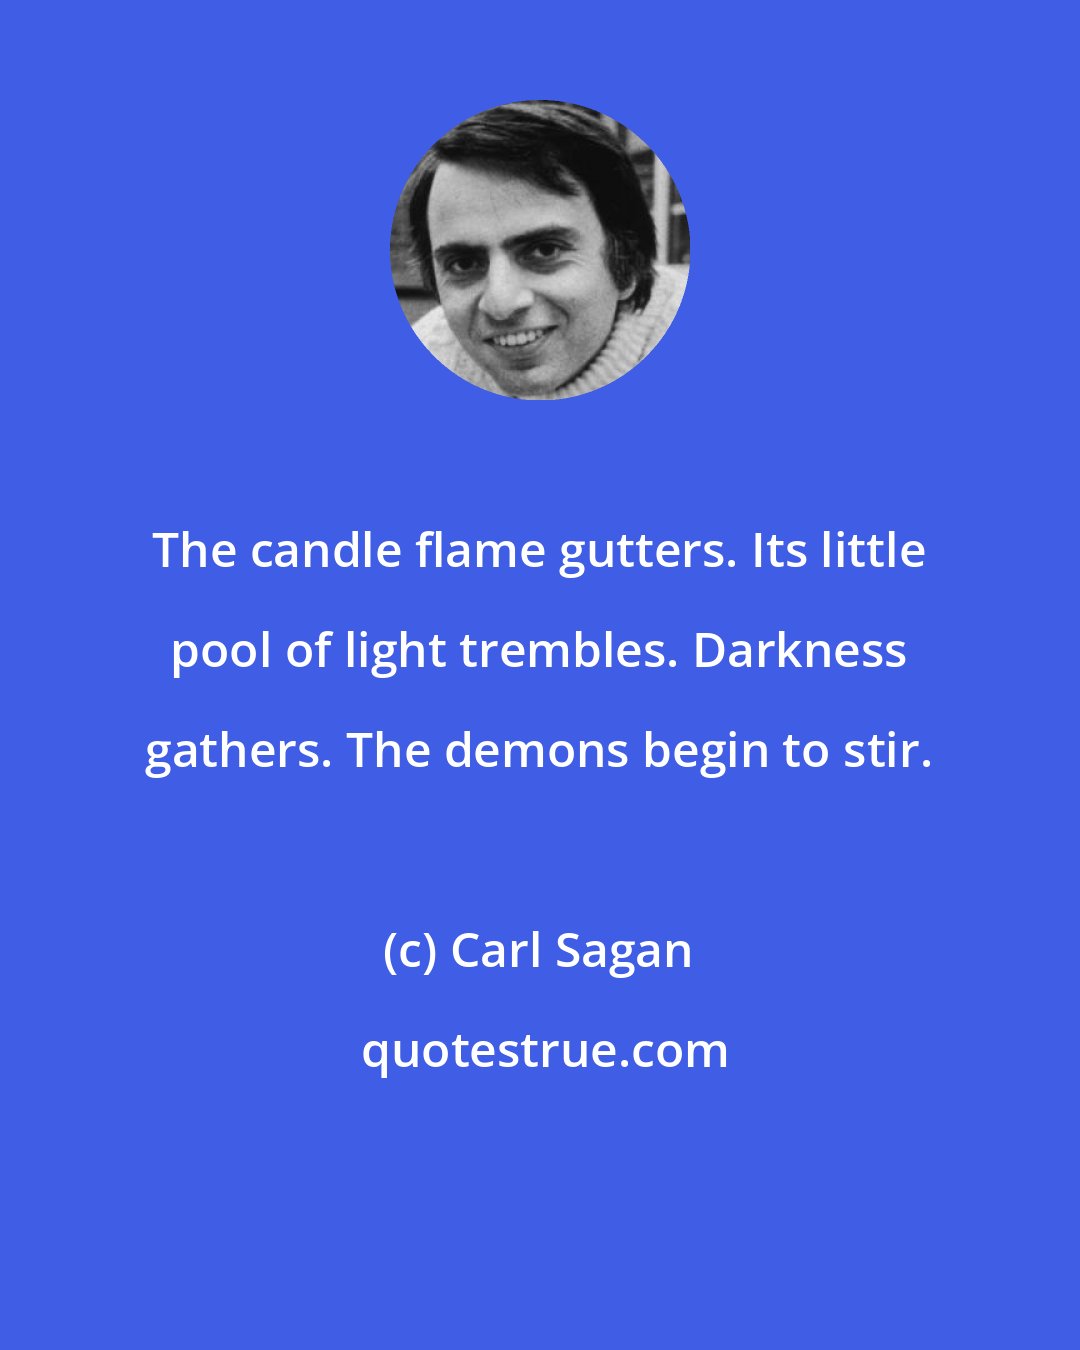 Carl Sagan: The candle flame gutters. Its little pool of light trembles. Darkness gathers. The demons begin to stir.